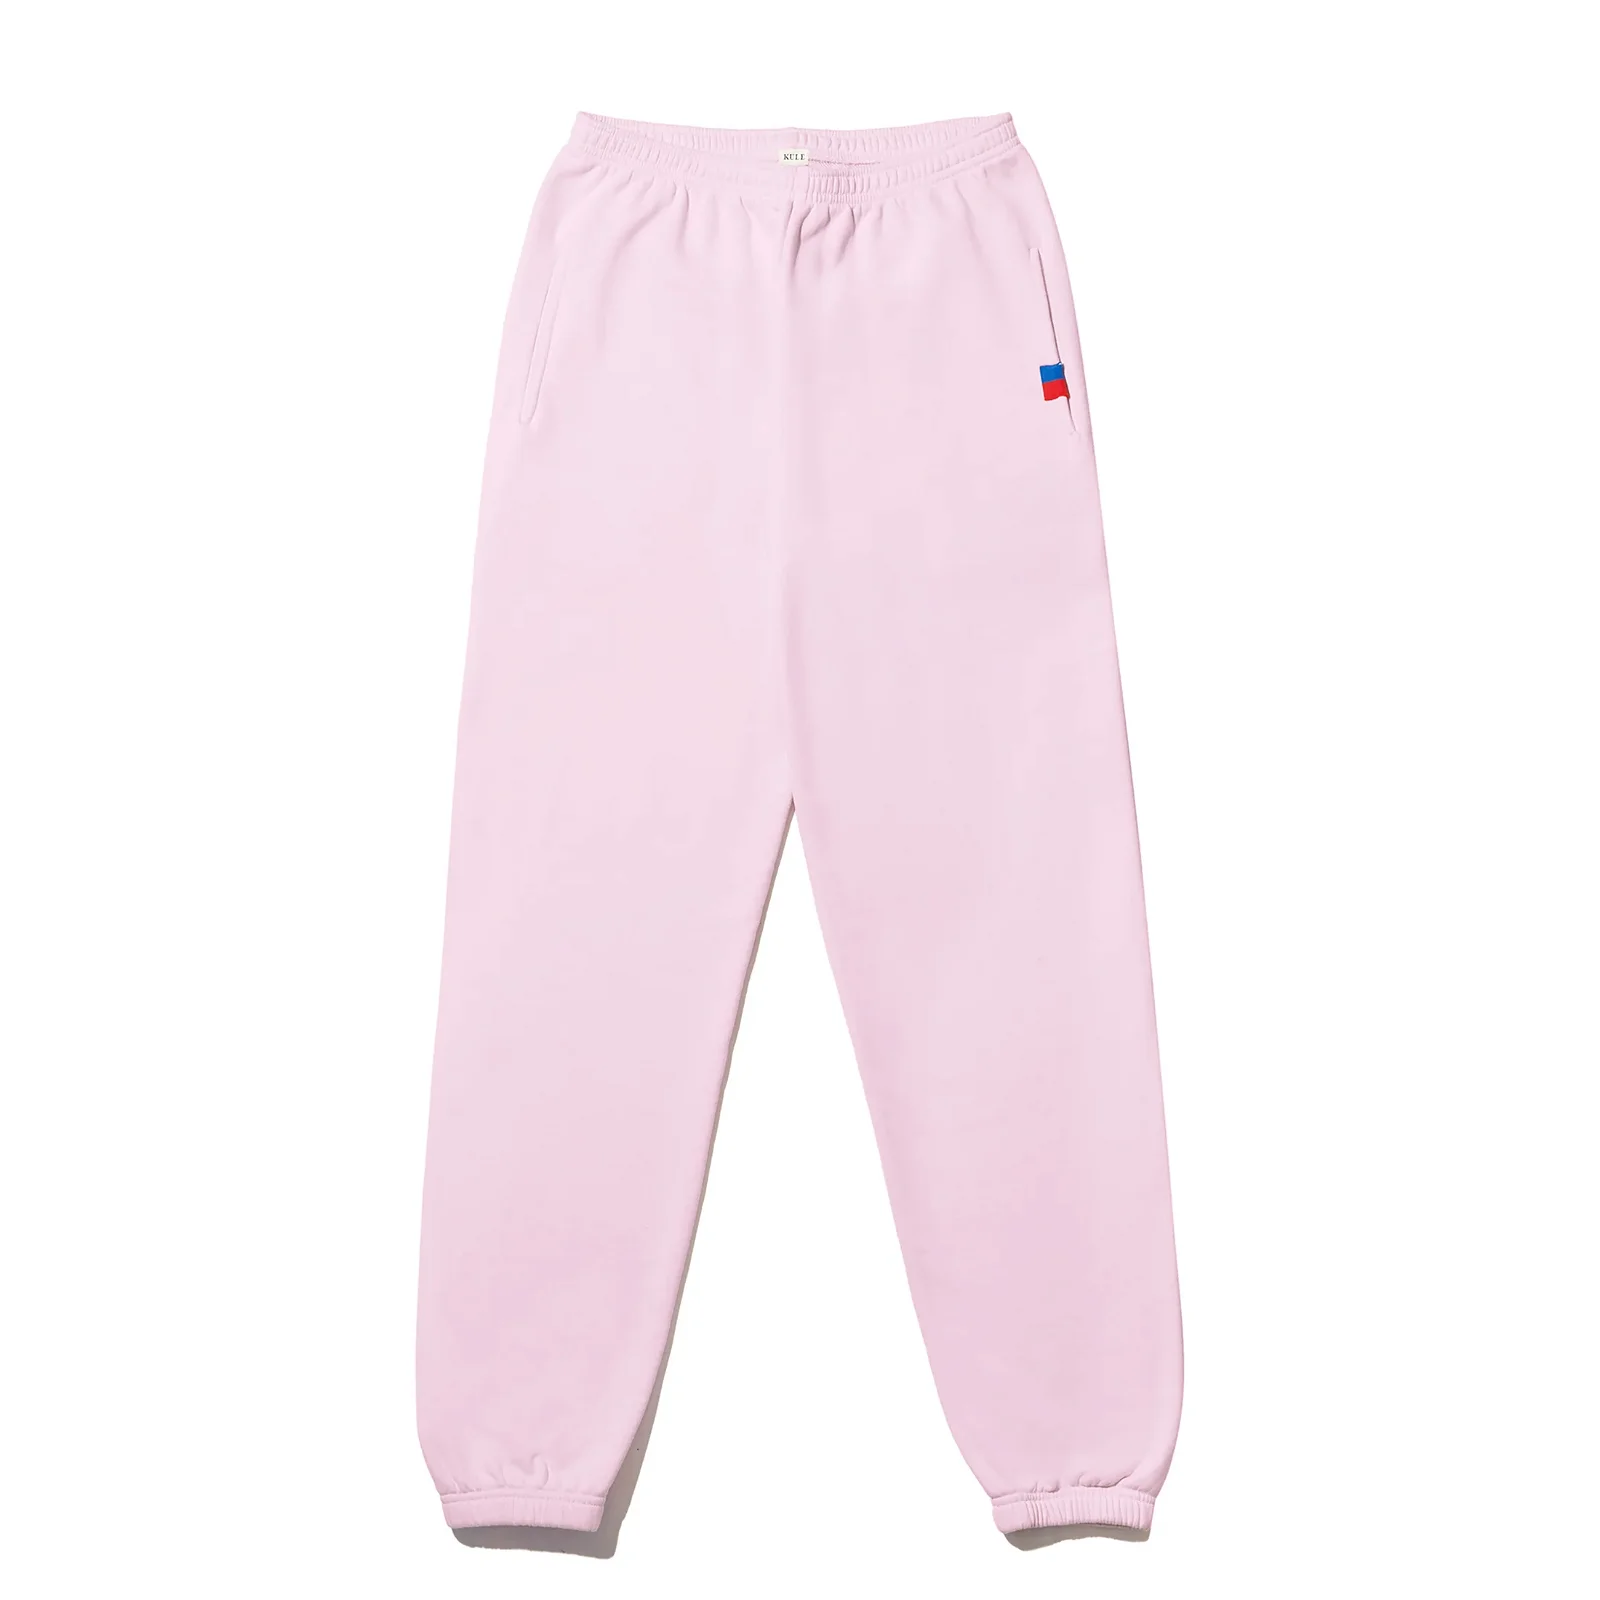 Image of The Sweatpants - Pink